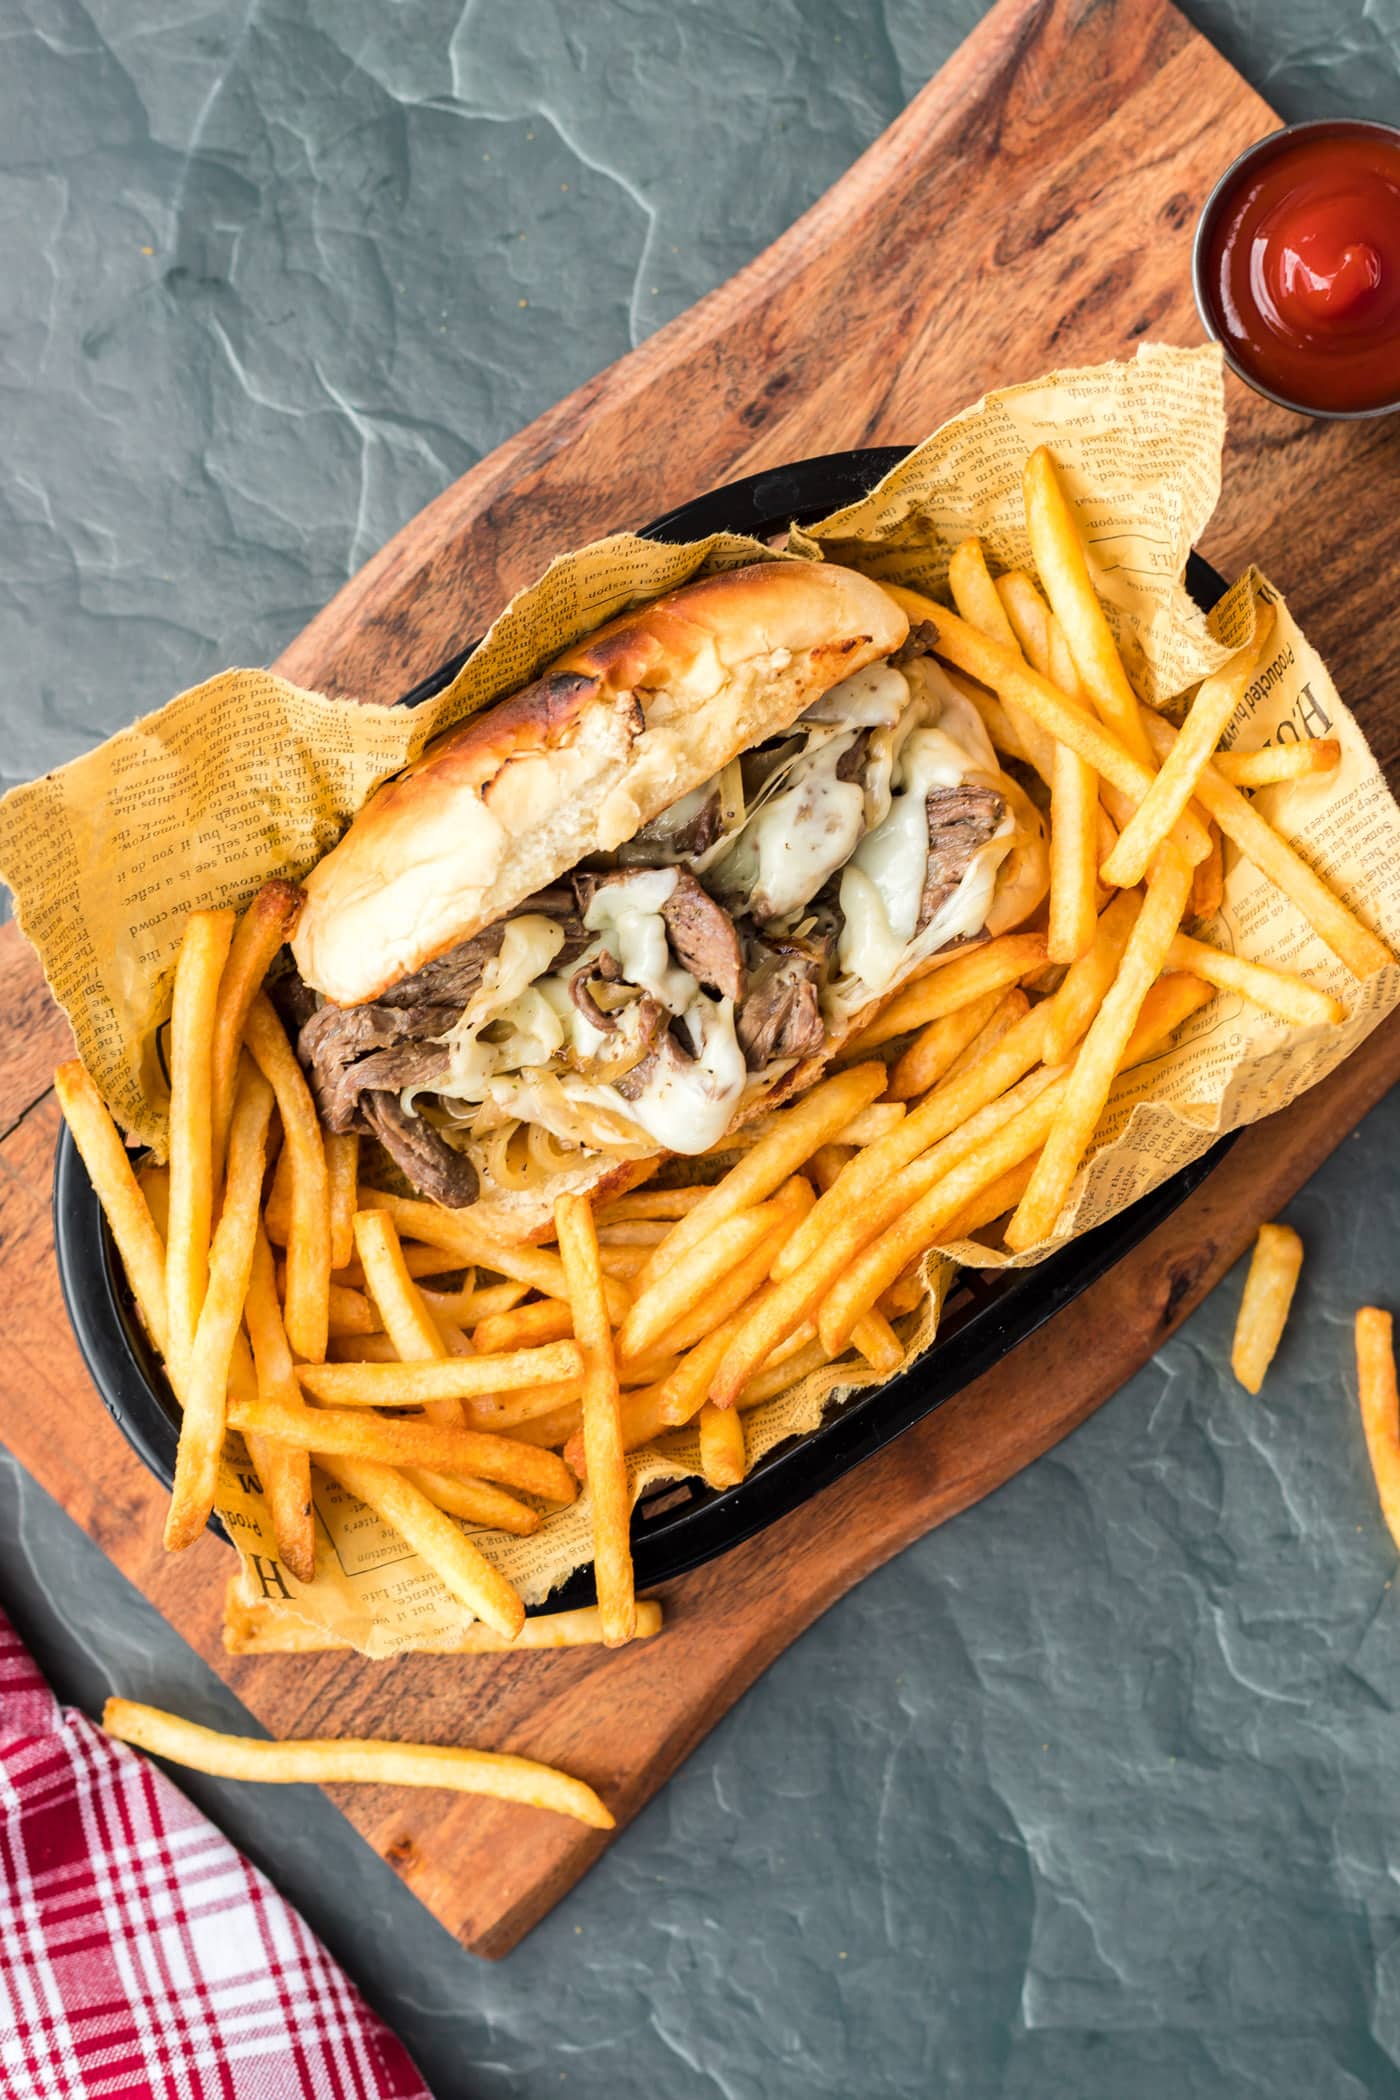 philly cheese steak sandwich in a basket with french fries